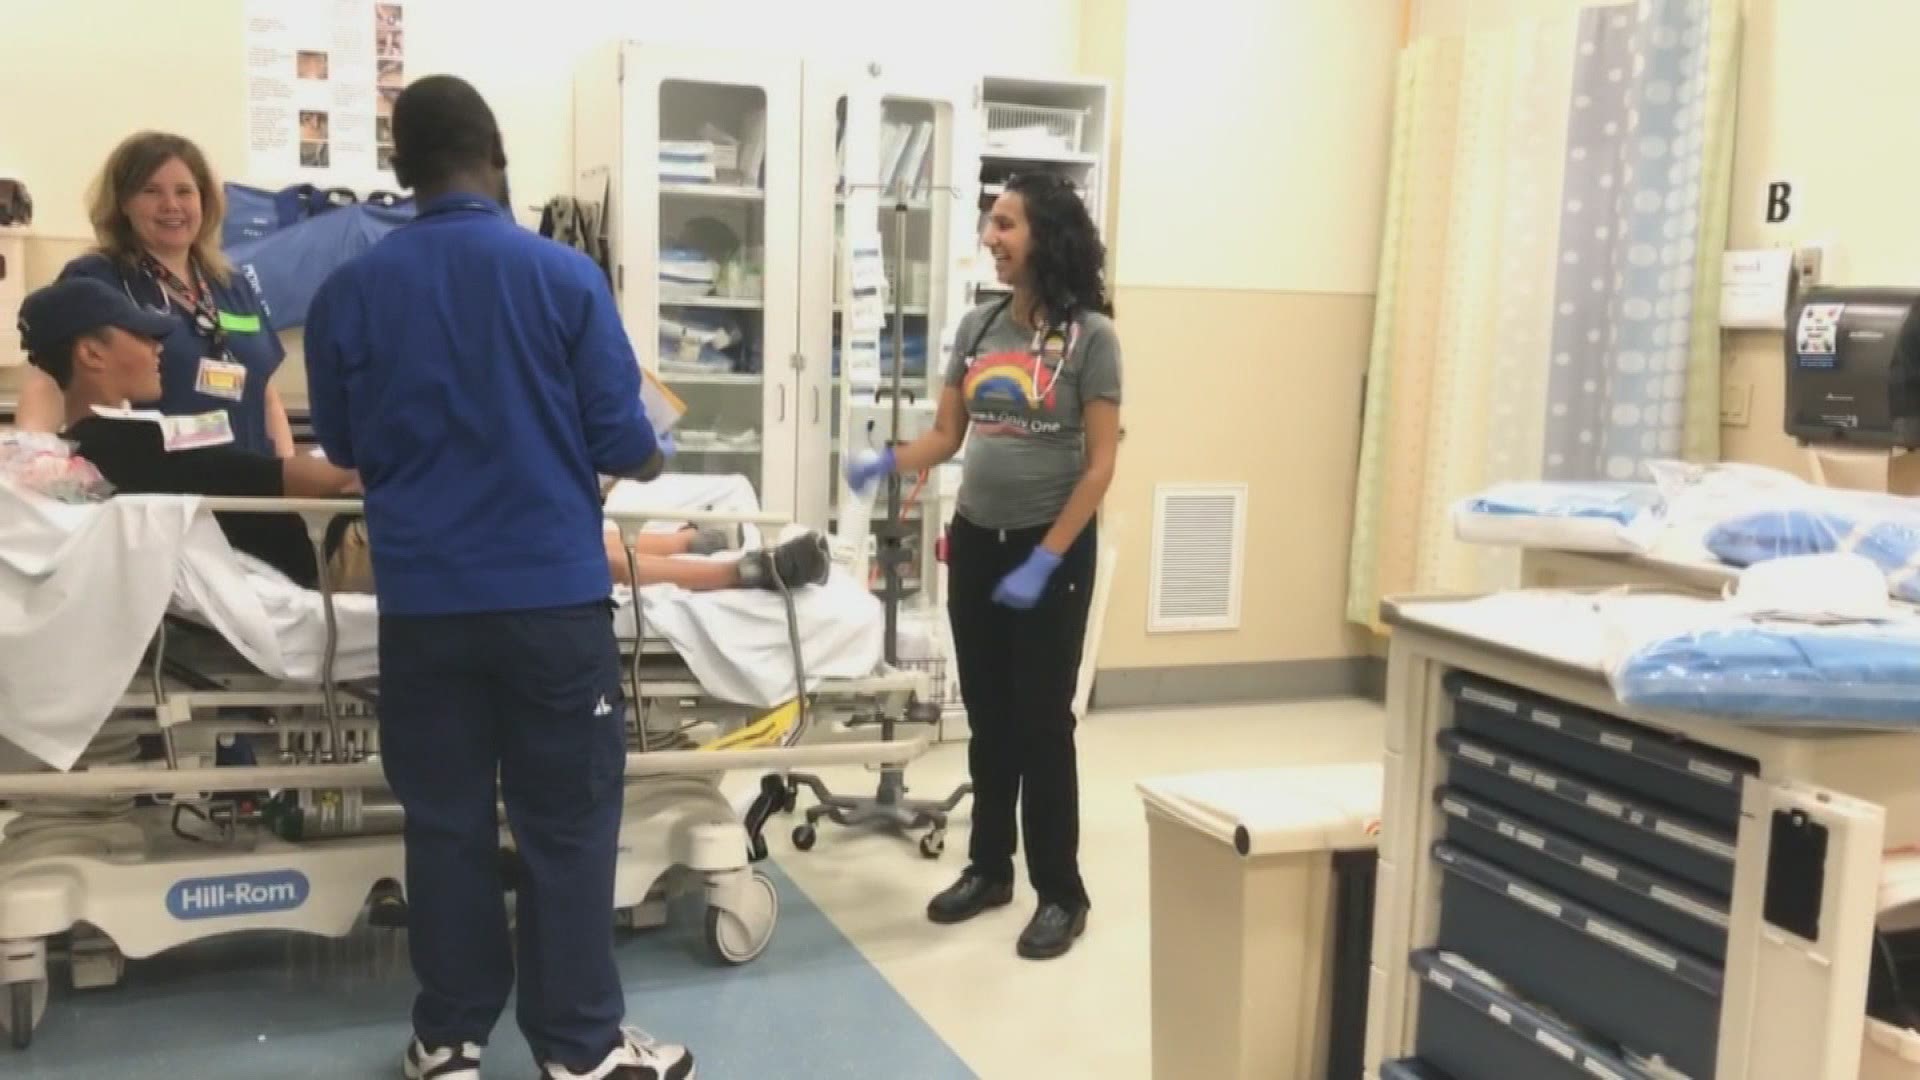 University Hospitals practiced a mock emergency drill June 12. Pretend patients of varying ages, injuries and illnesses came through the hospital to test its staff.